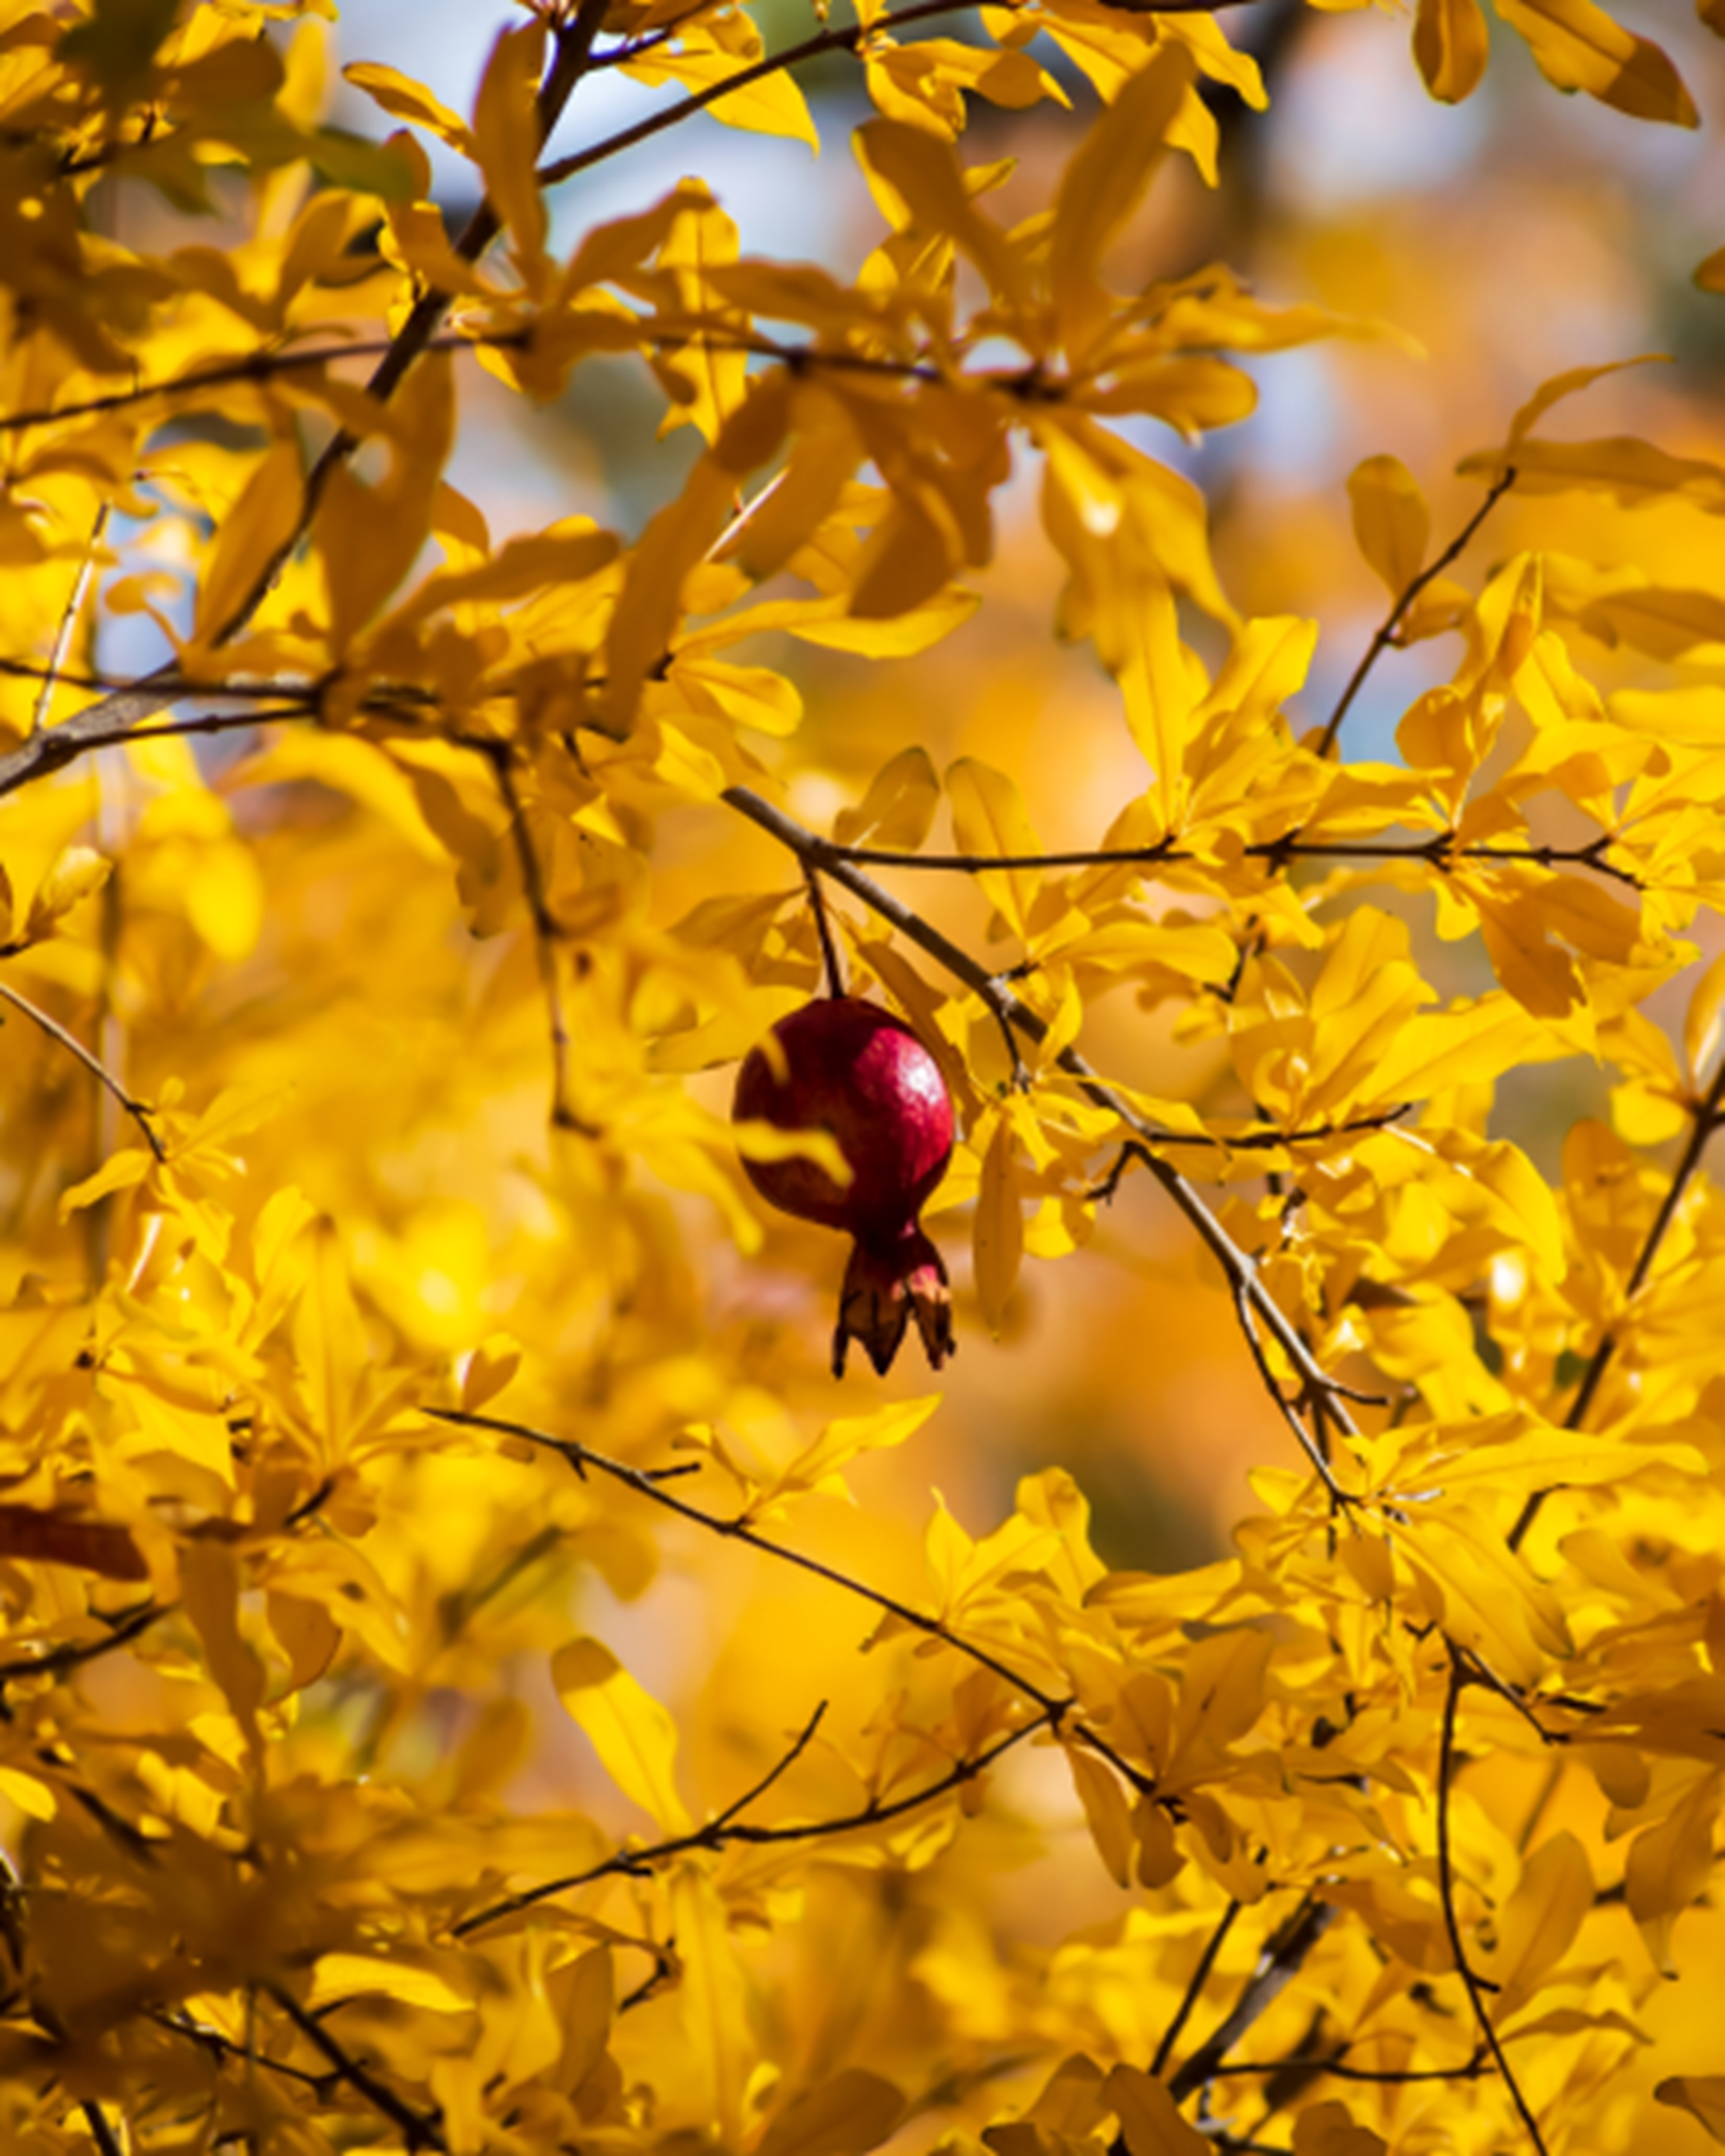 Pomegranate amid yellow leaves